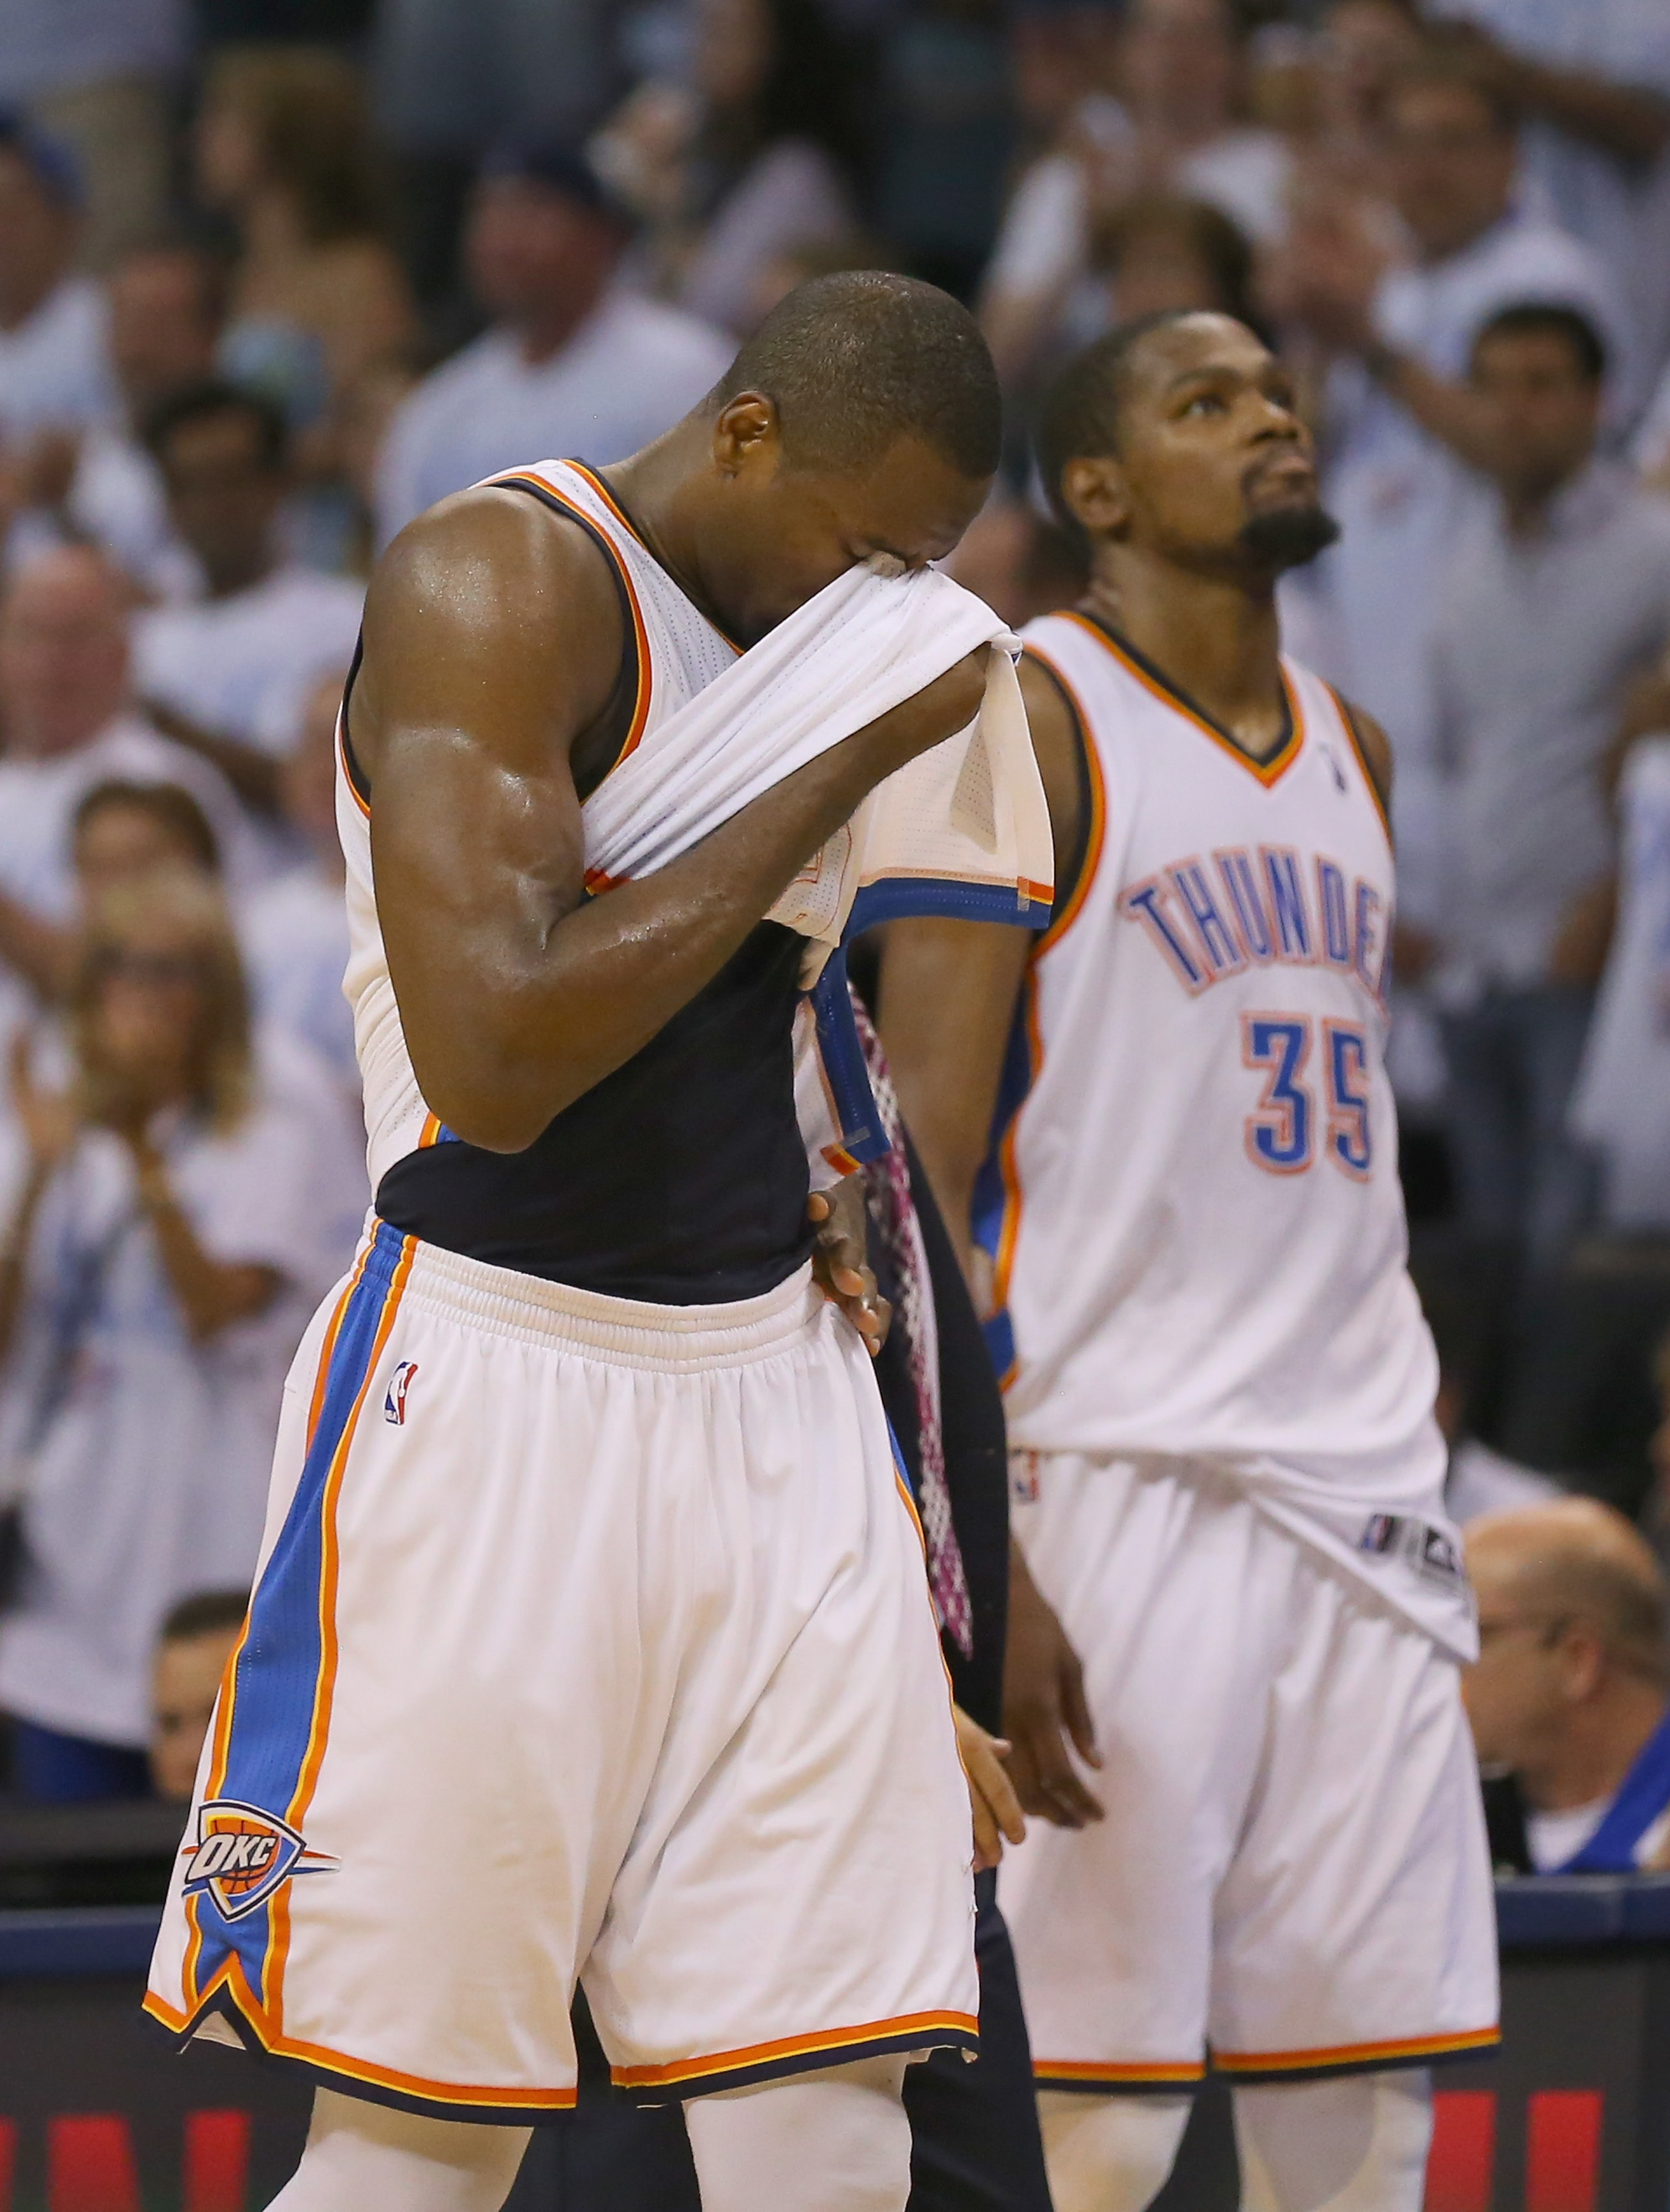 There are no easy solutions for Serge Ibaka against Shawn Kemp